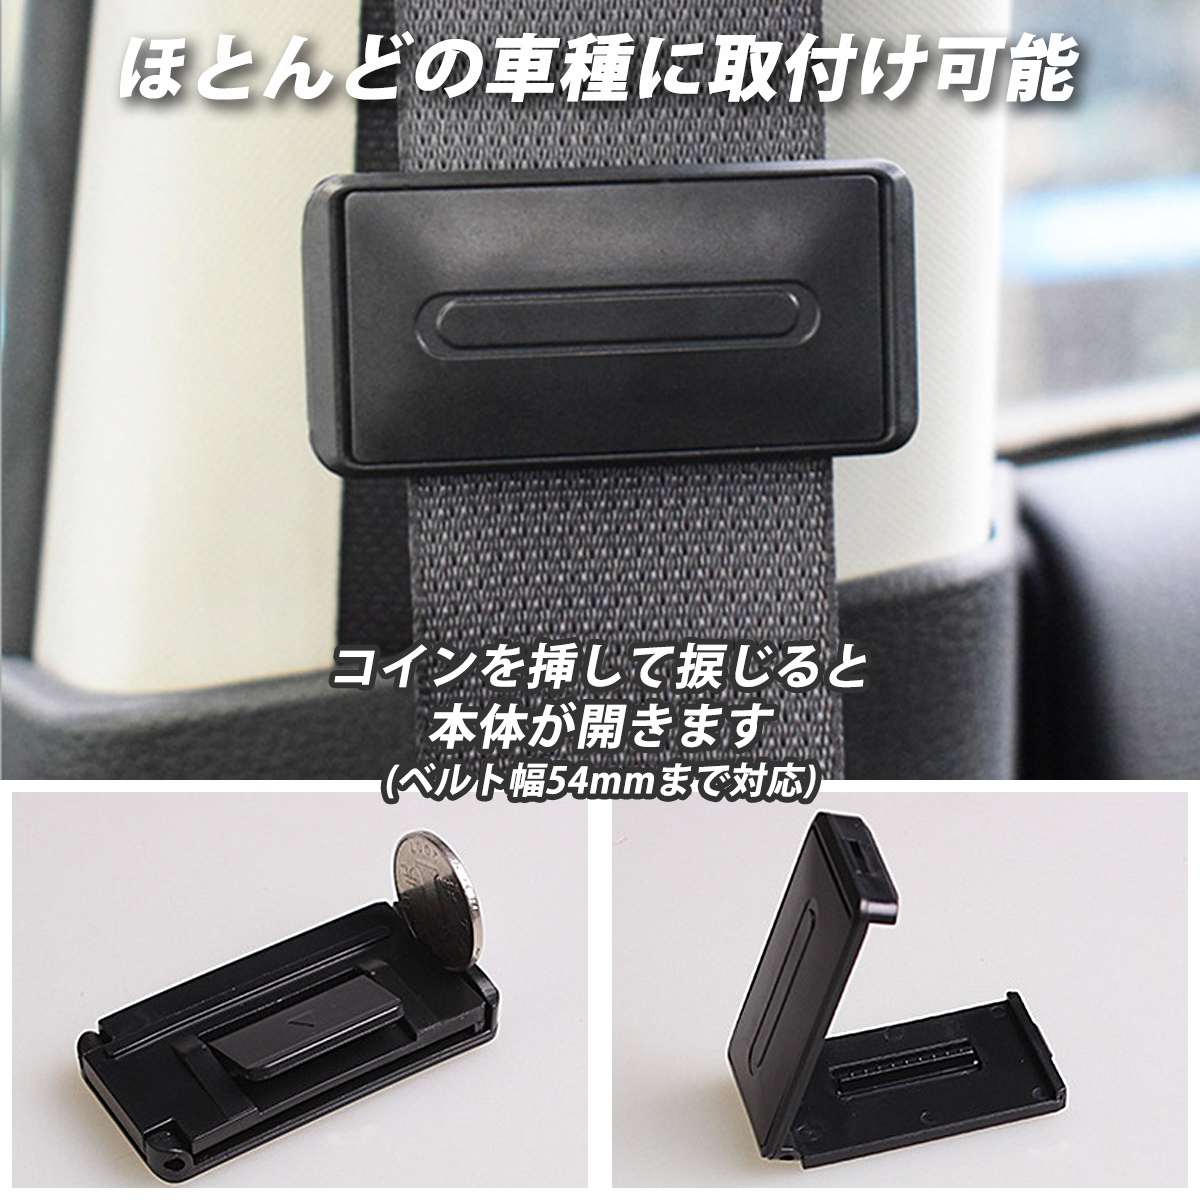  seat belt stopper 2 piece set seat belt cover tighten attaching reduction fatigue reduction support pressure . feeling child .. car supplies car goods simple 